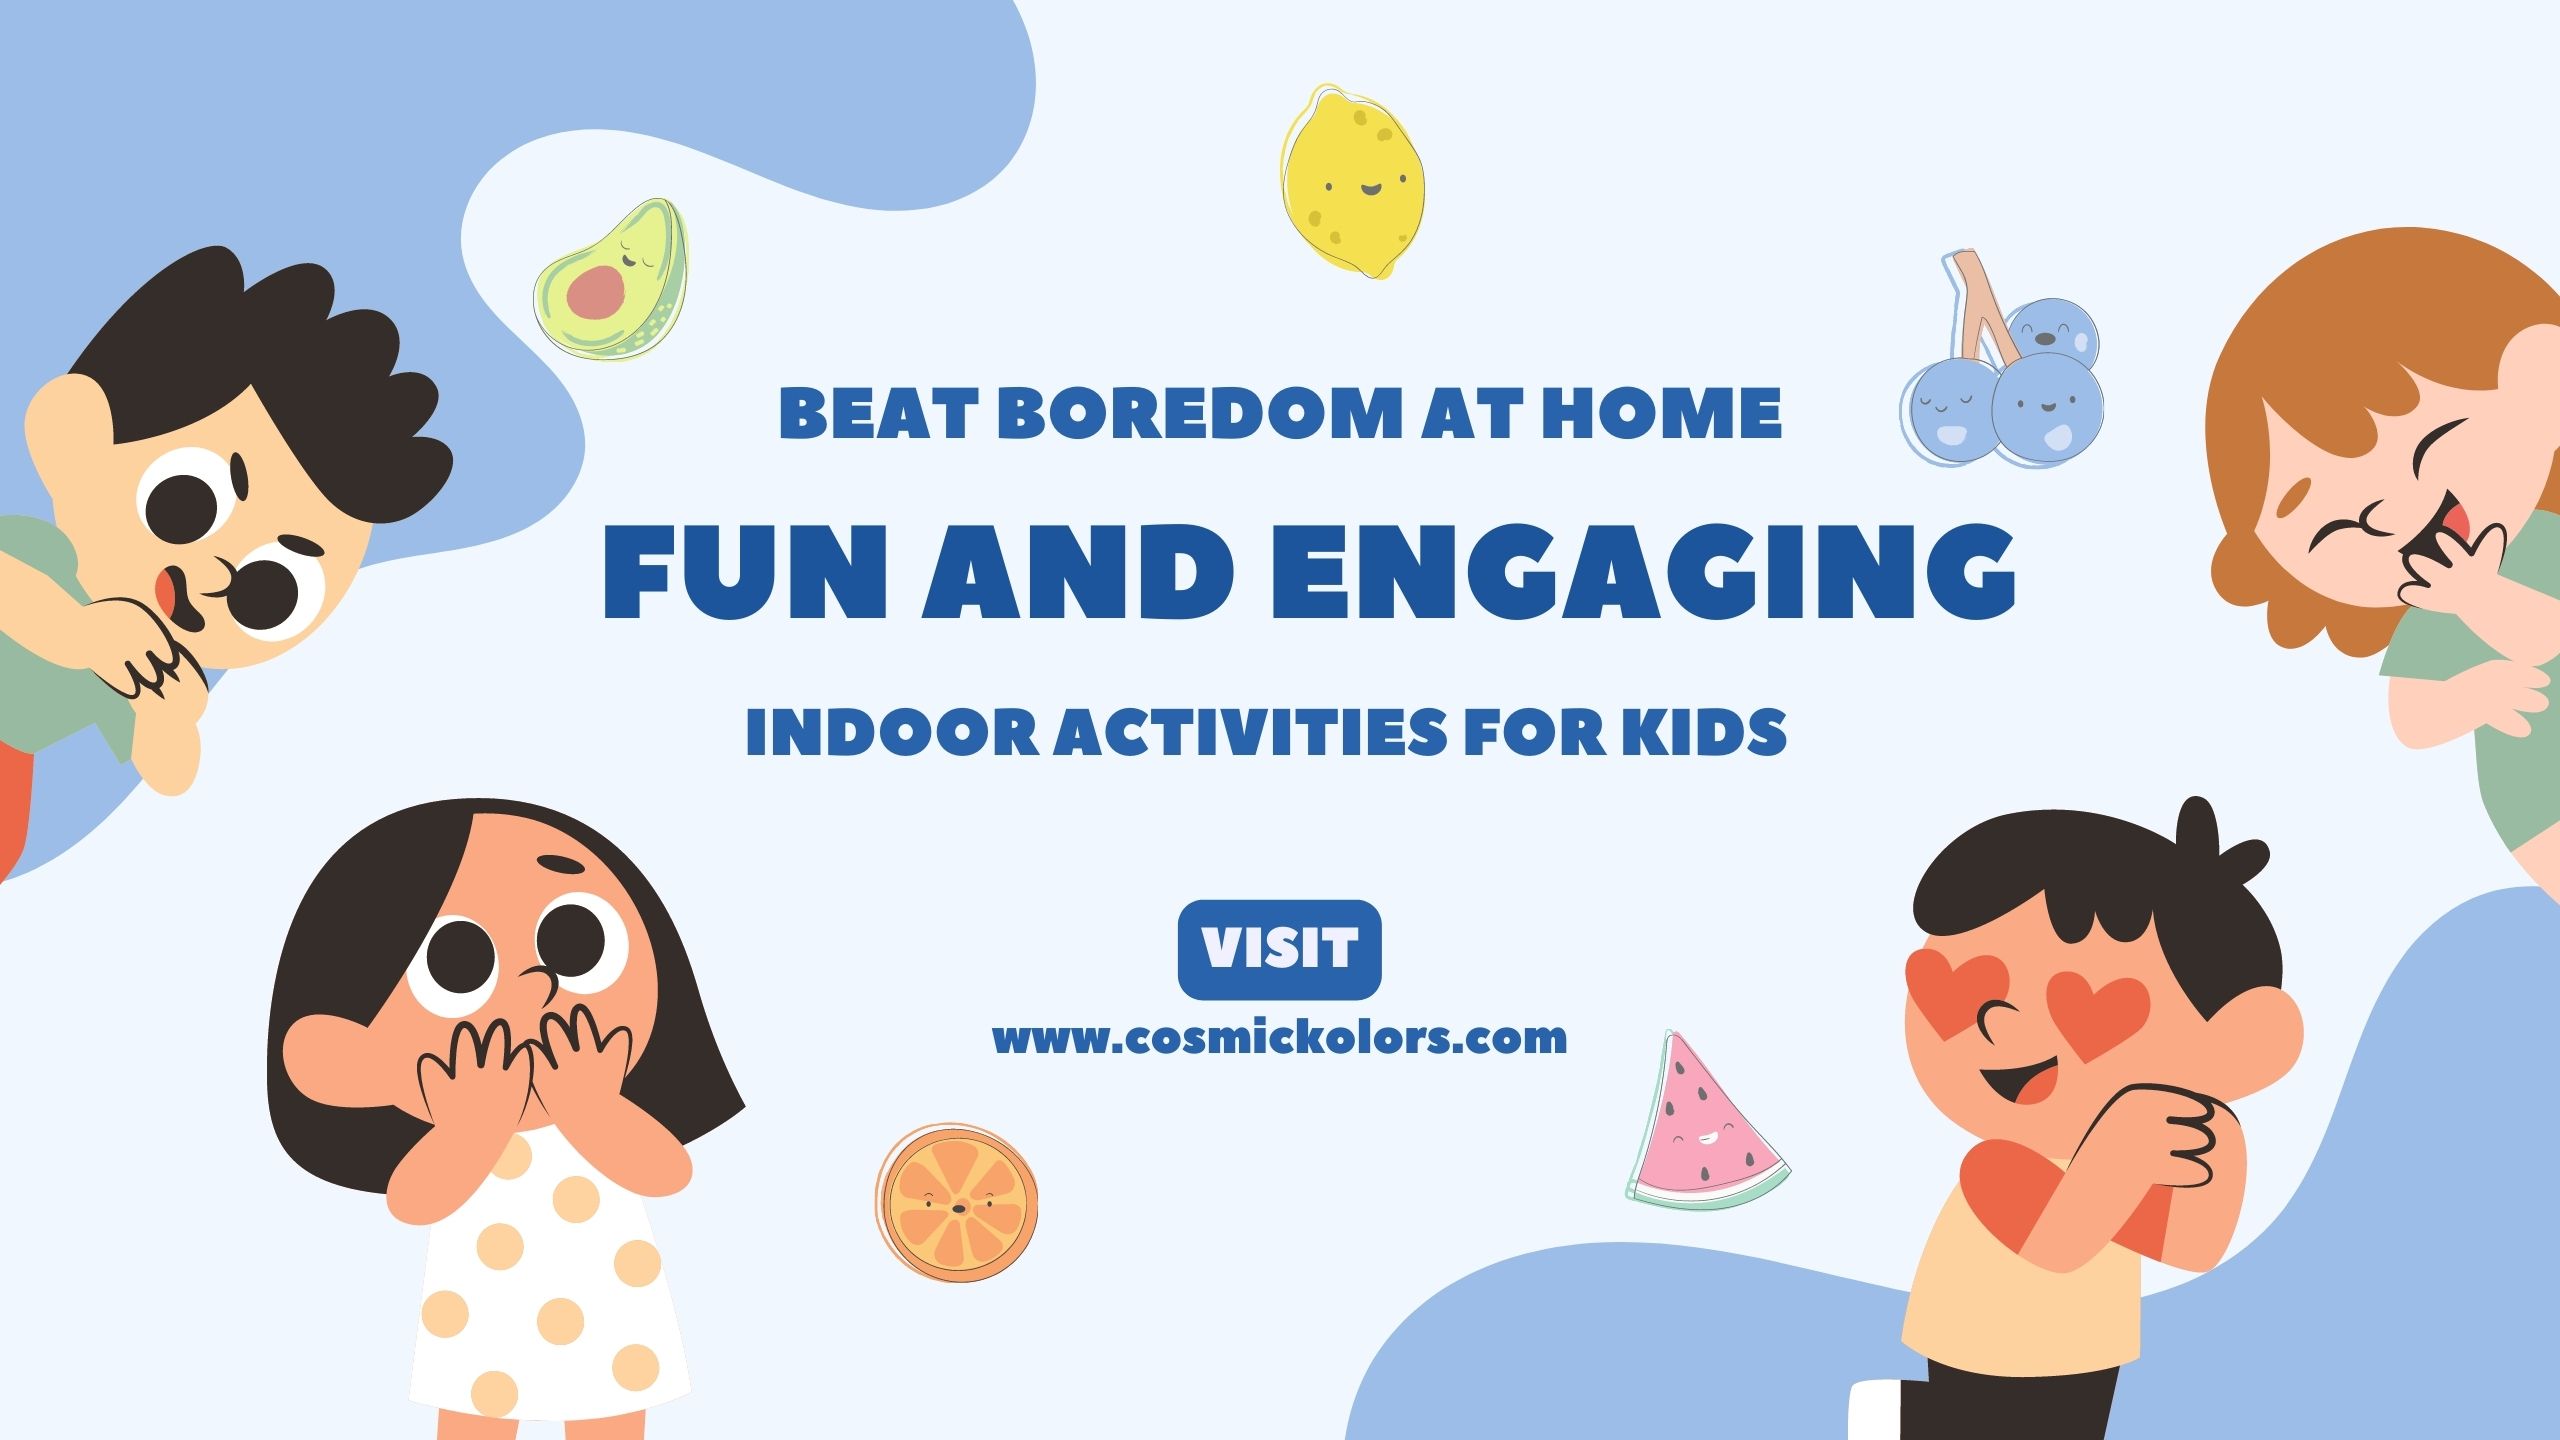 Fun and engaging activities for kids